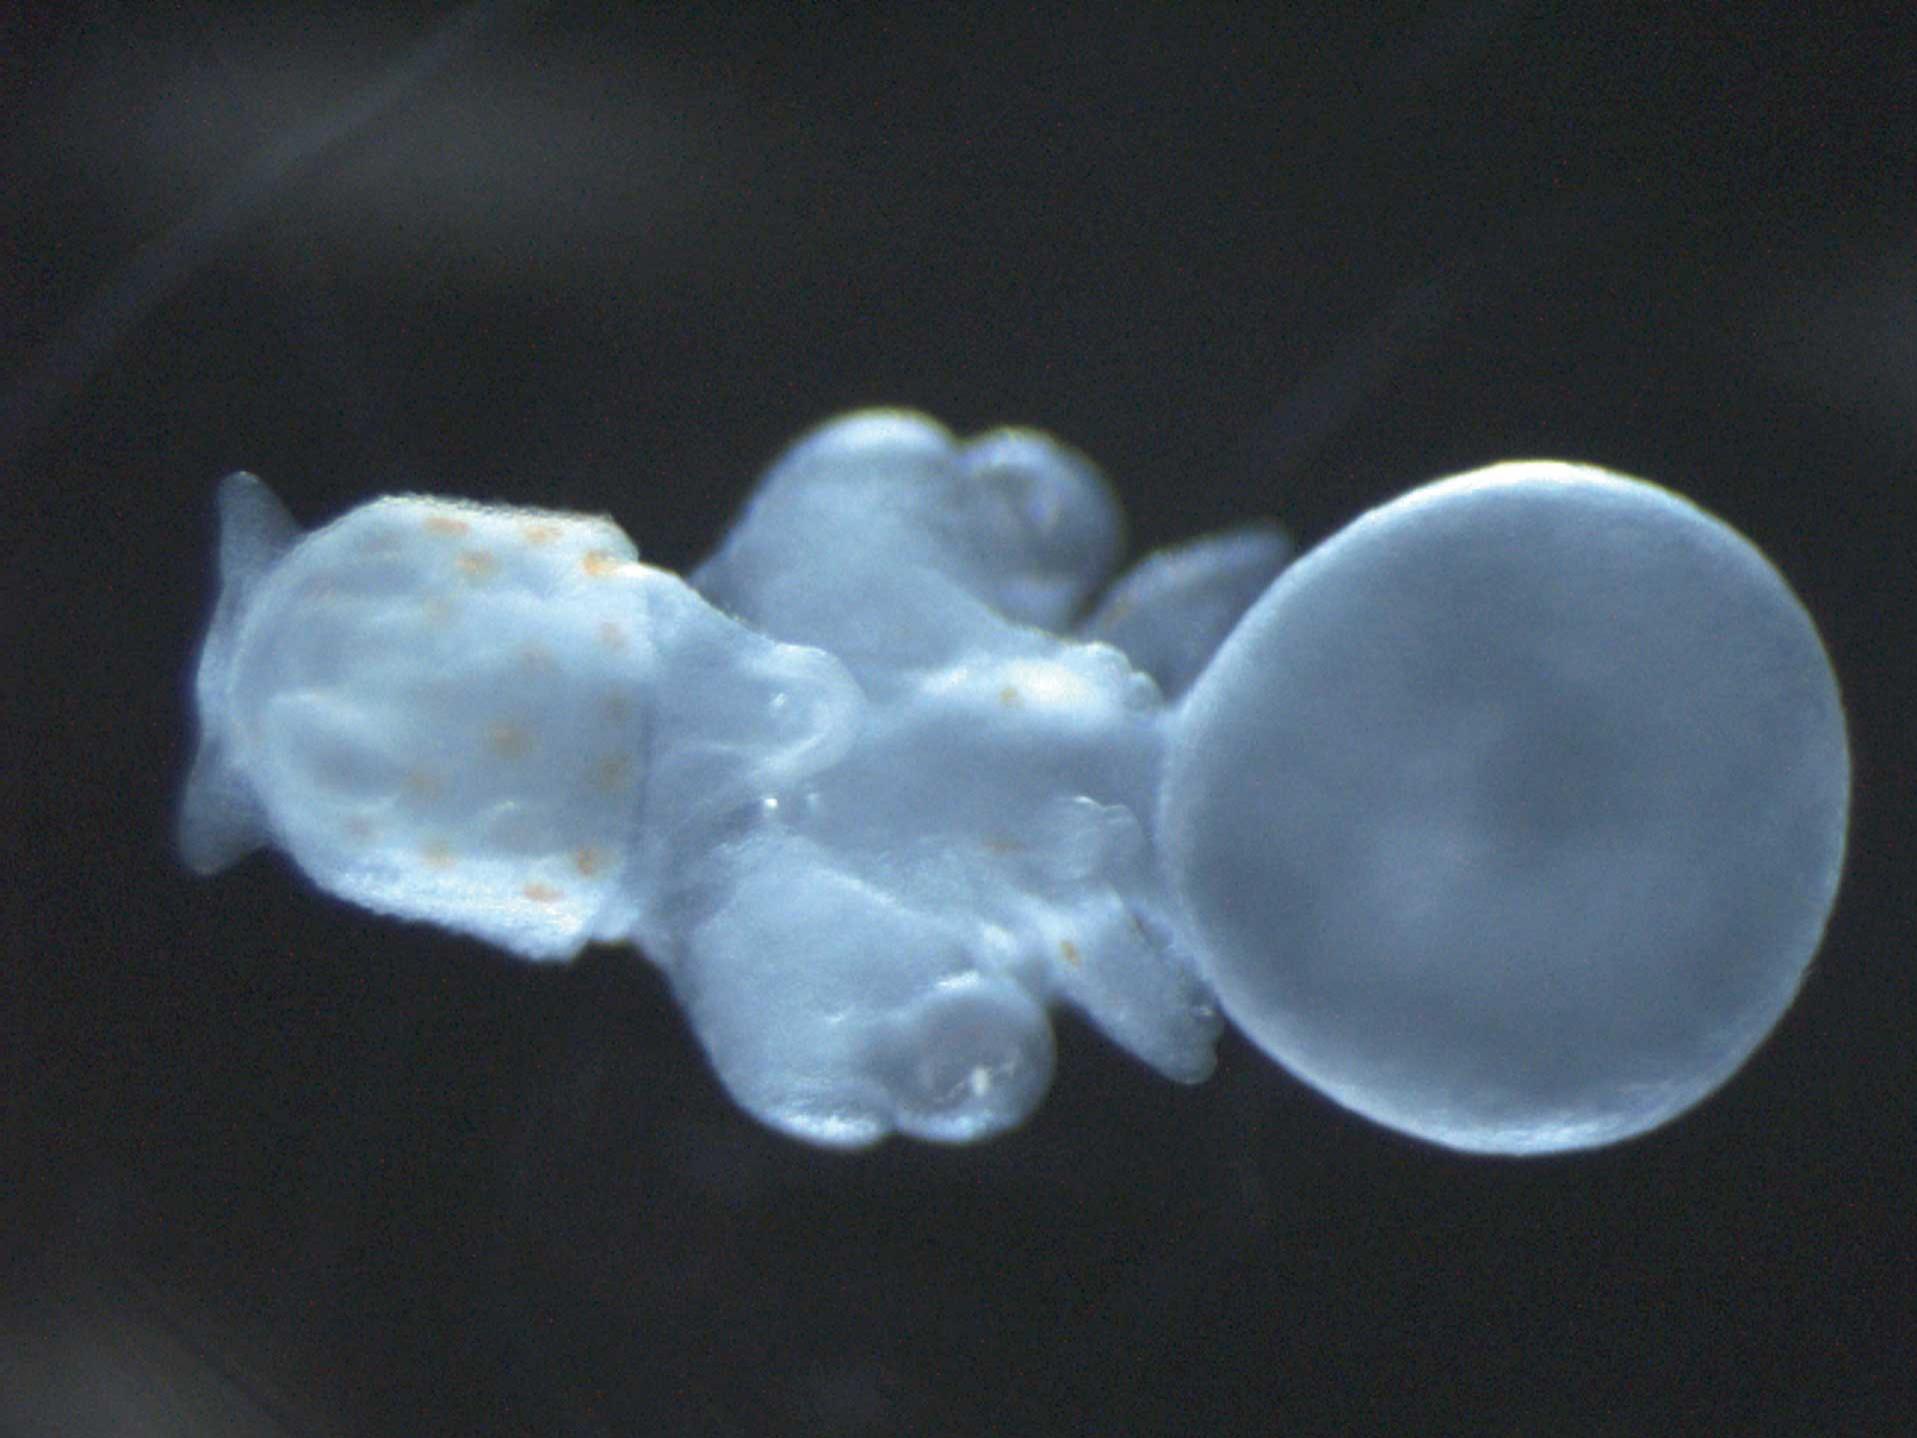 Embryonic stage of a squid